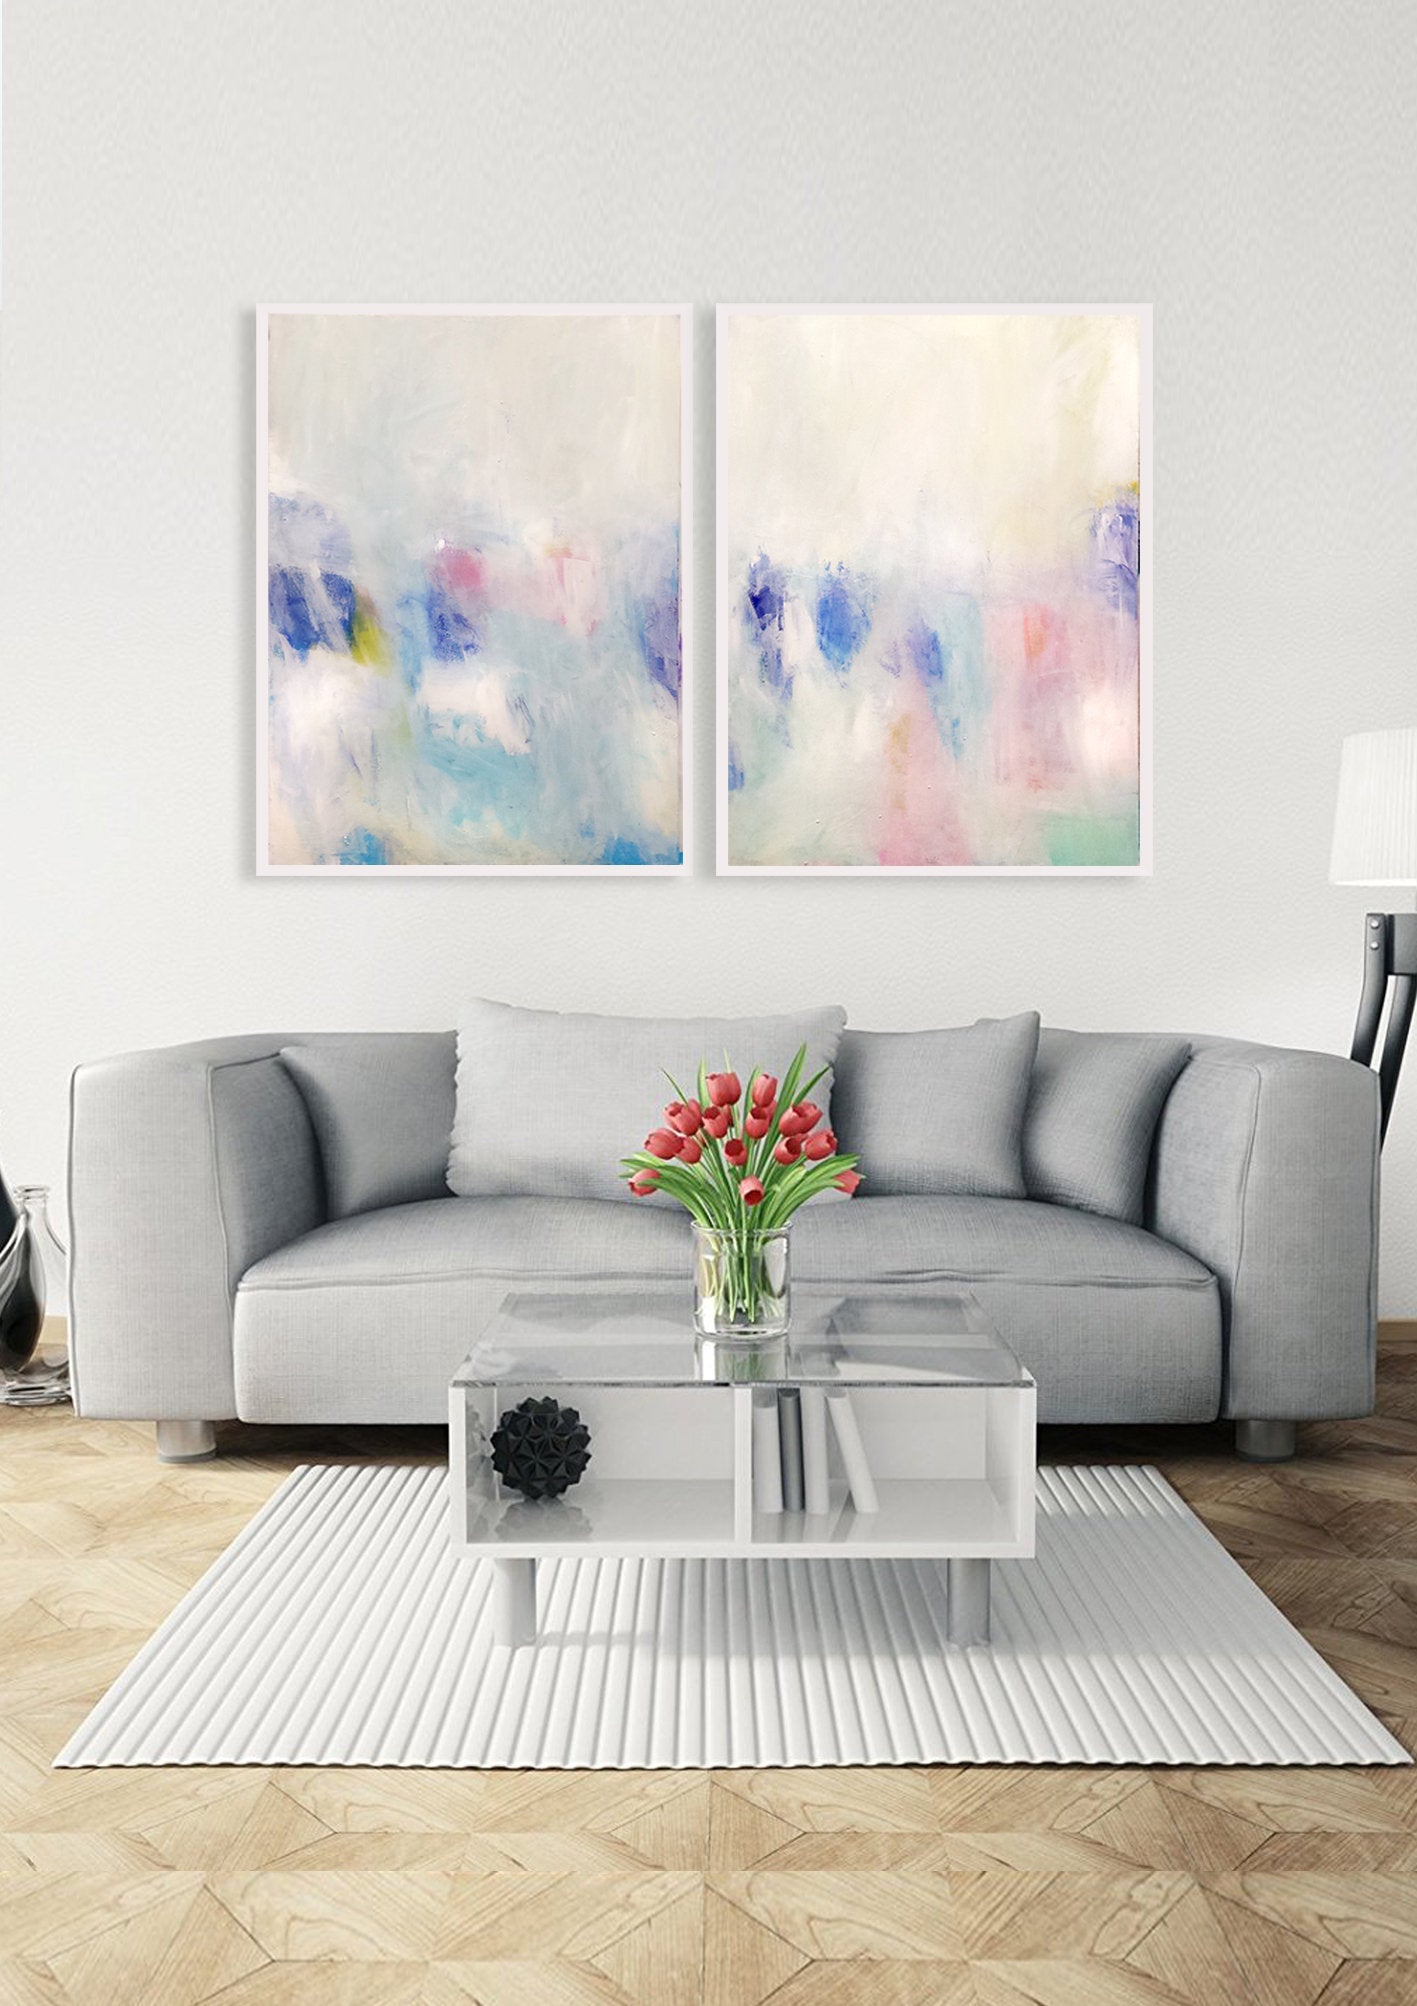 Set of 2 extra large prints, Abstract Acrylic Painting Giclee of Original Wall Art, abstract wall art, large abstract art, Camilo Mattis - camilomattis.com